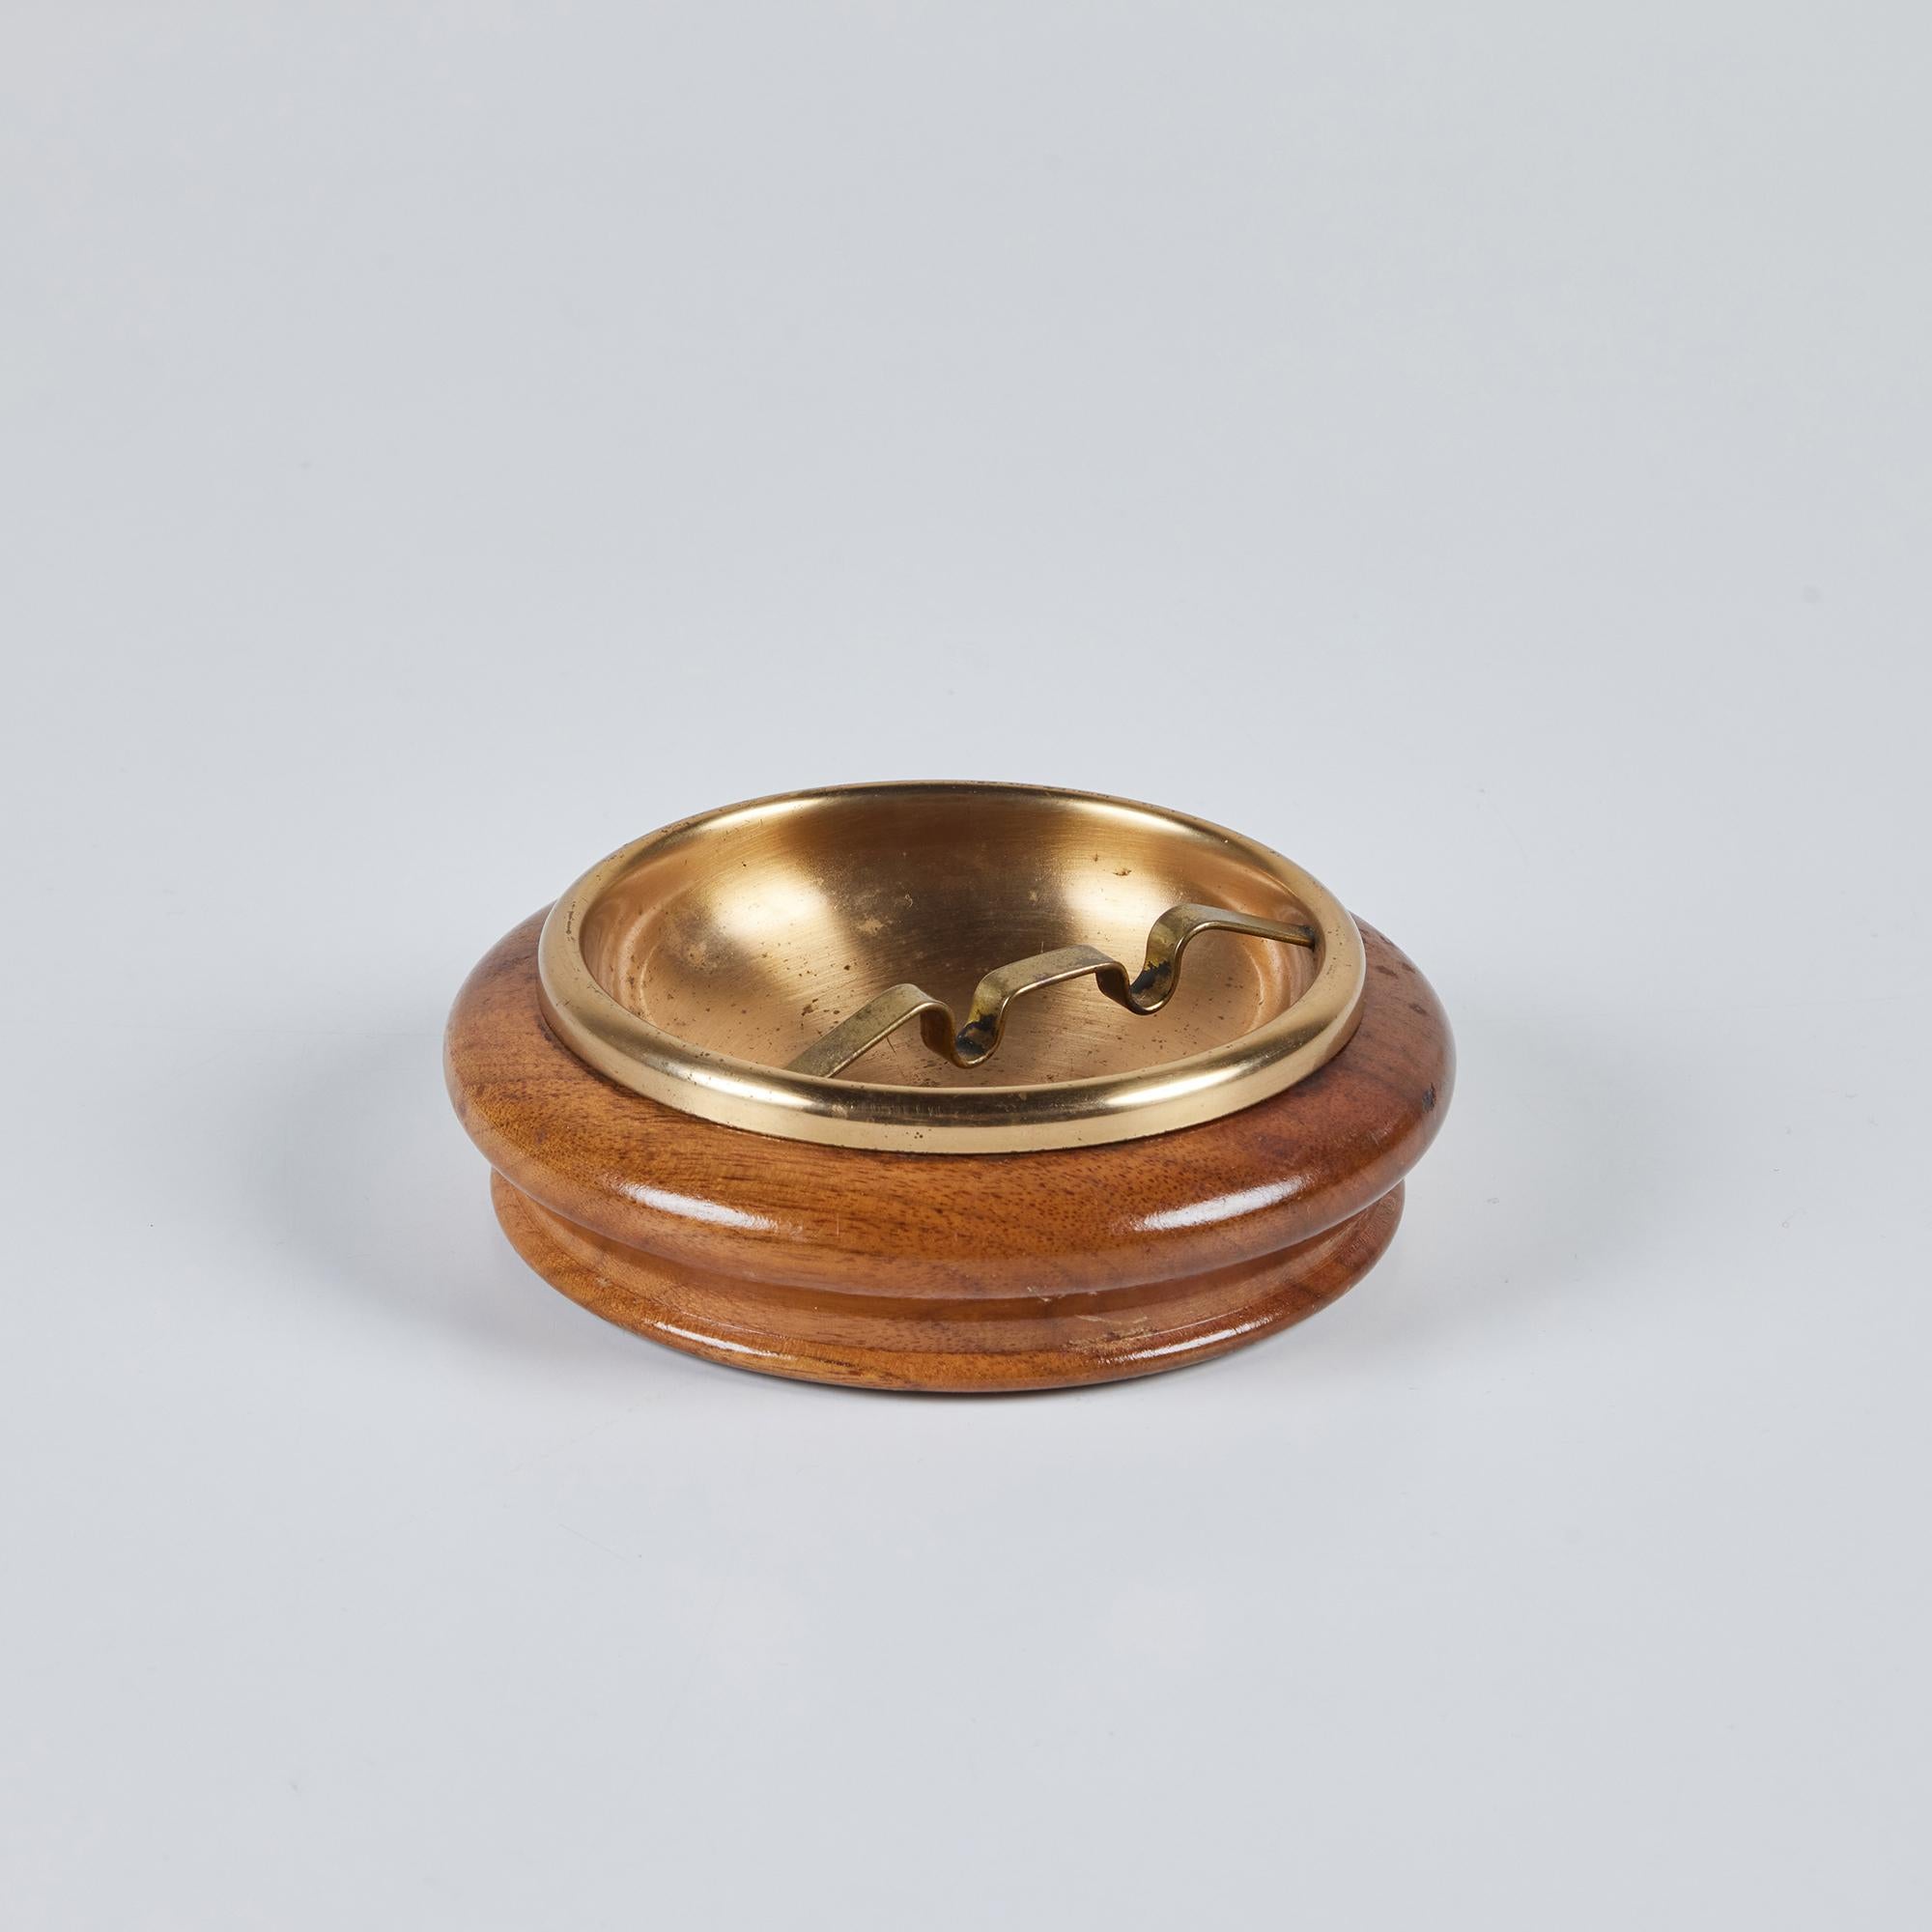 Round walnut ashtray c.1950s from Duk-It out of Buffalo, New York. This ashtray features a walnut exterior with brass insert. This piece can also be used as a vide poche or catchall to hold a myriad of things.

Dimensions
5.25